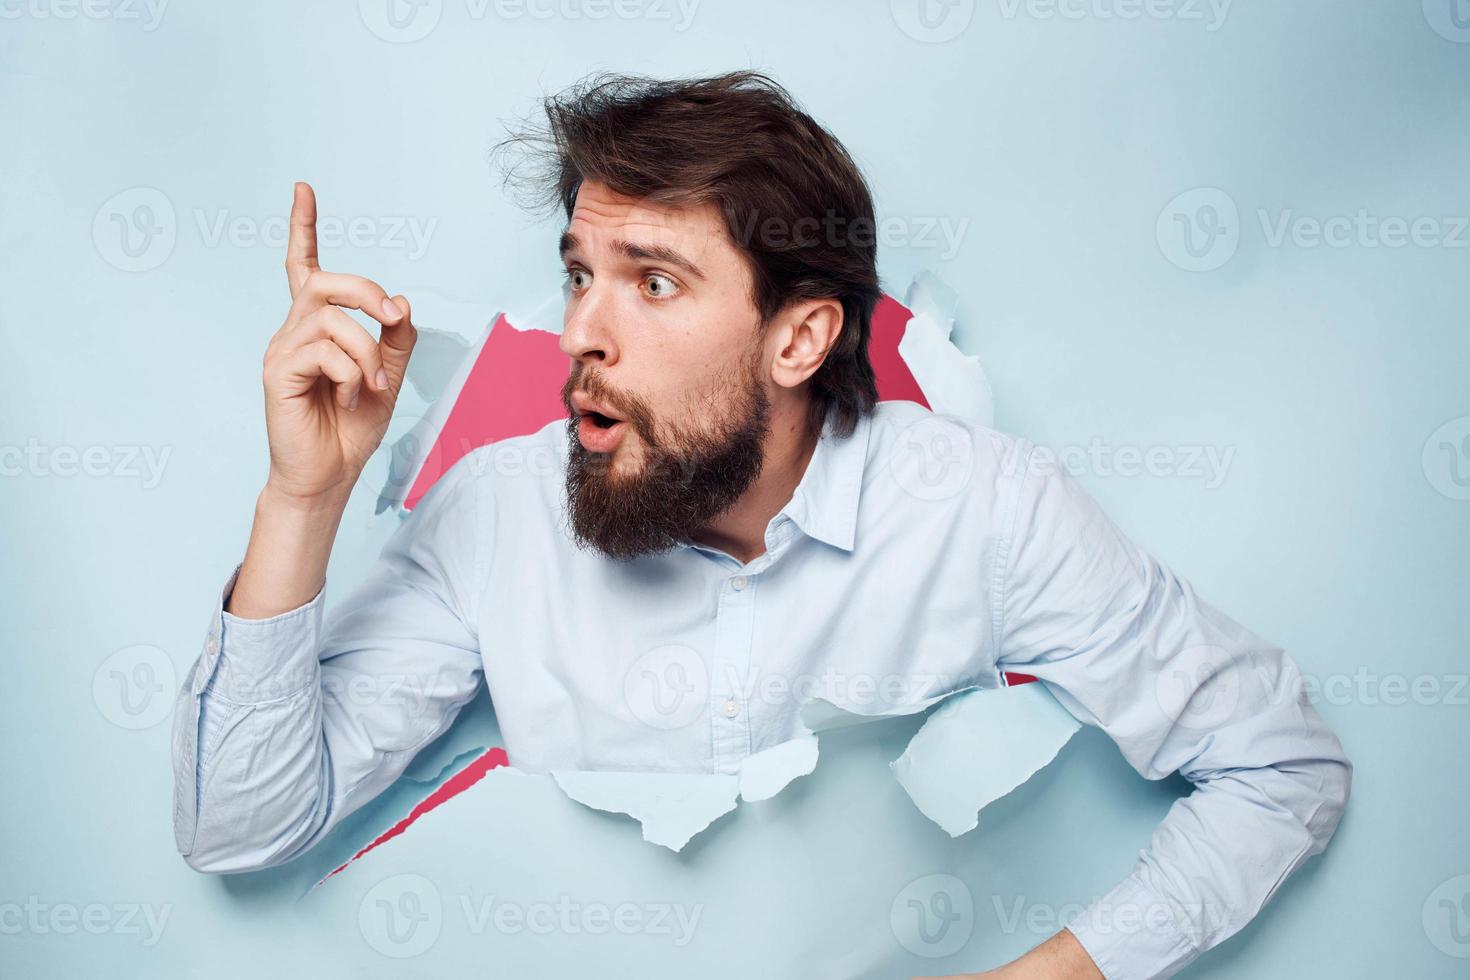 Bearded man in shirt Manager career work emotions lifestyle photo